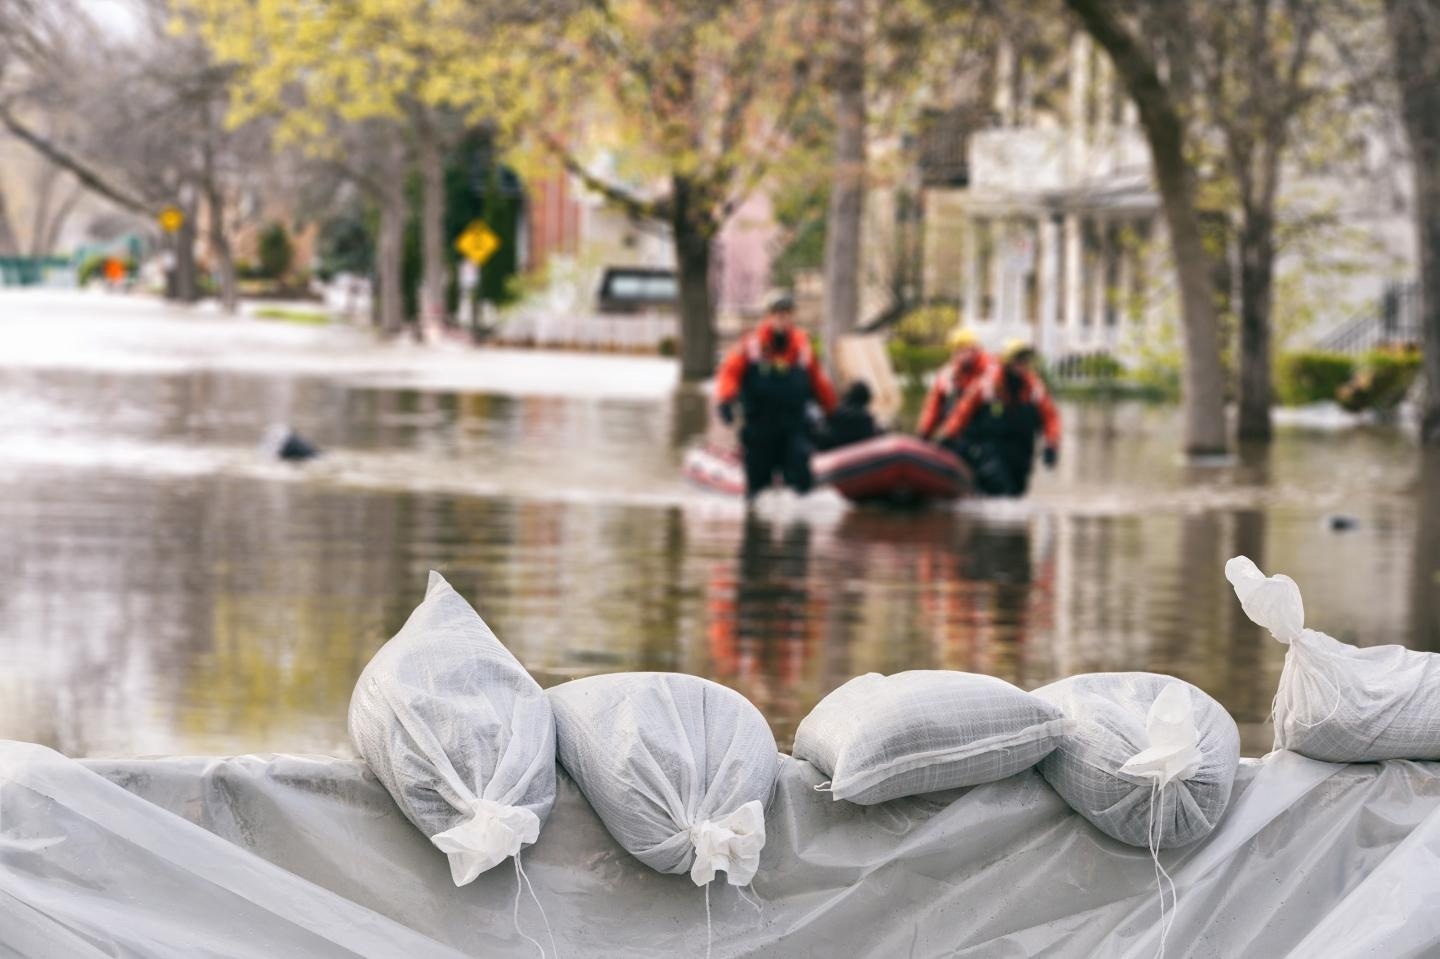 Improving Flood Preparedness With Accurate Damage Forecasts